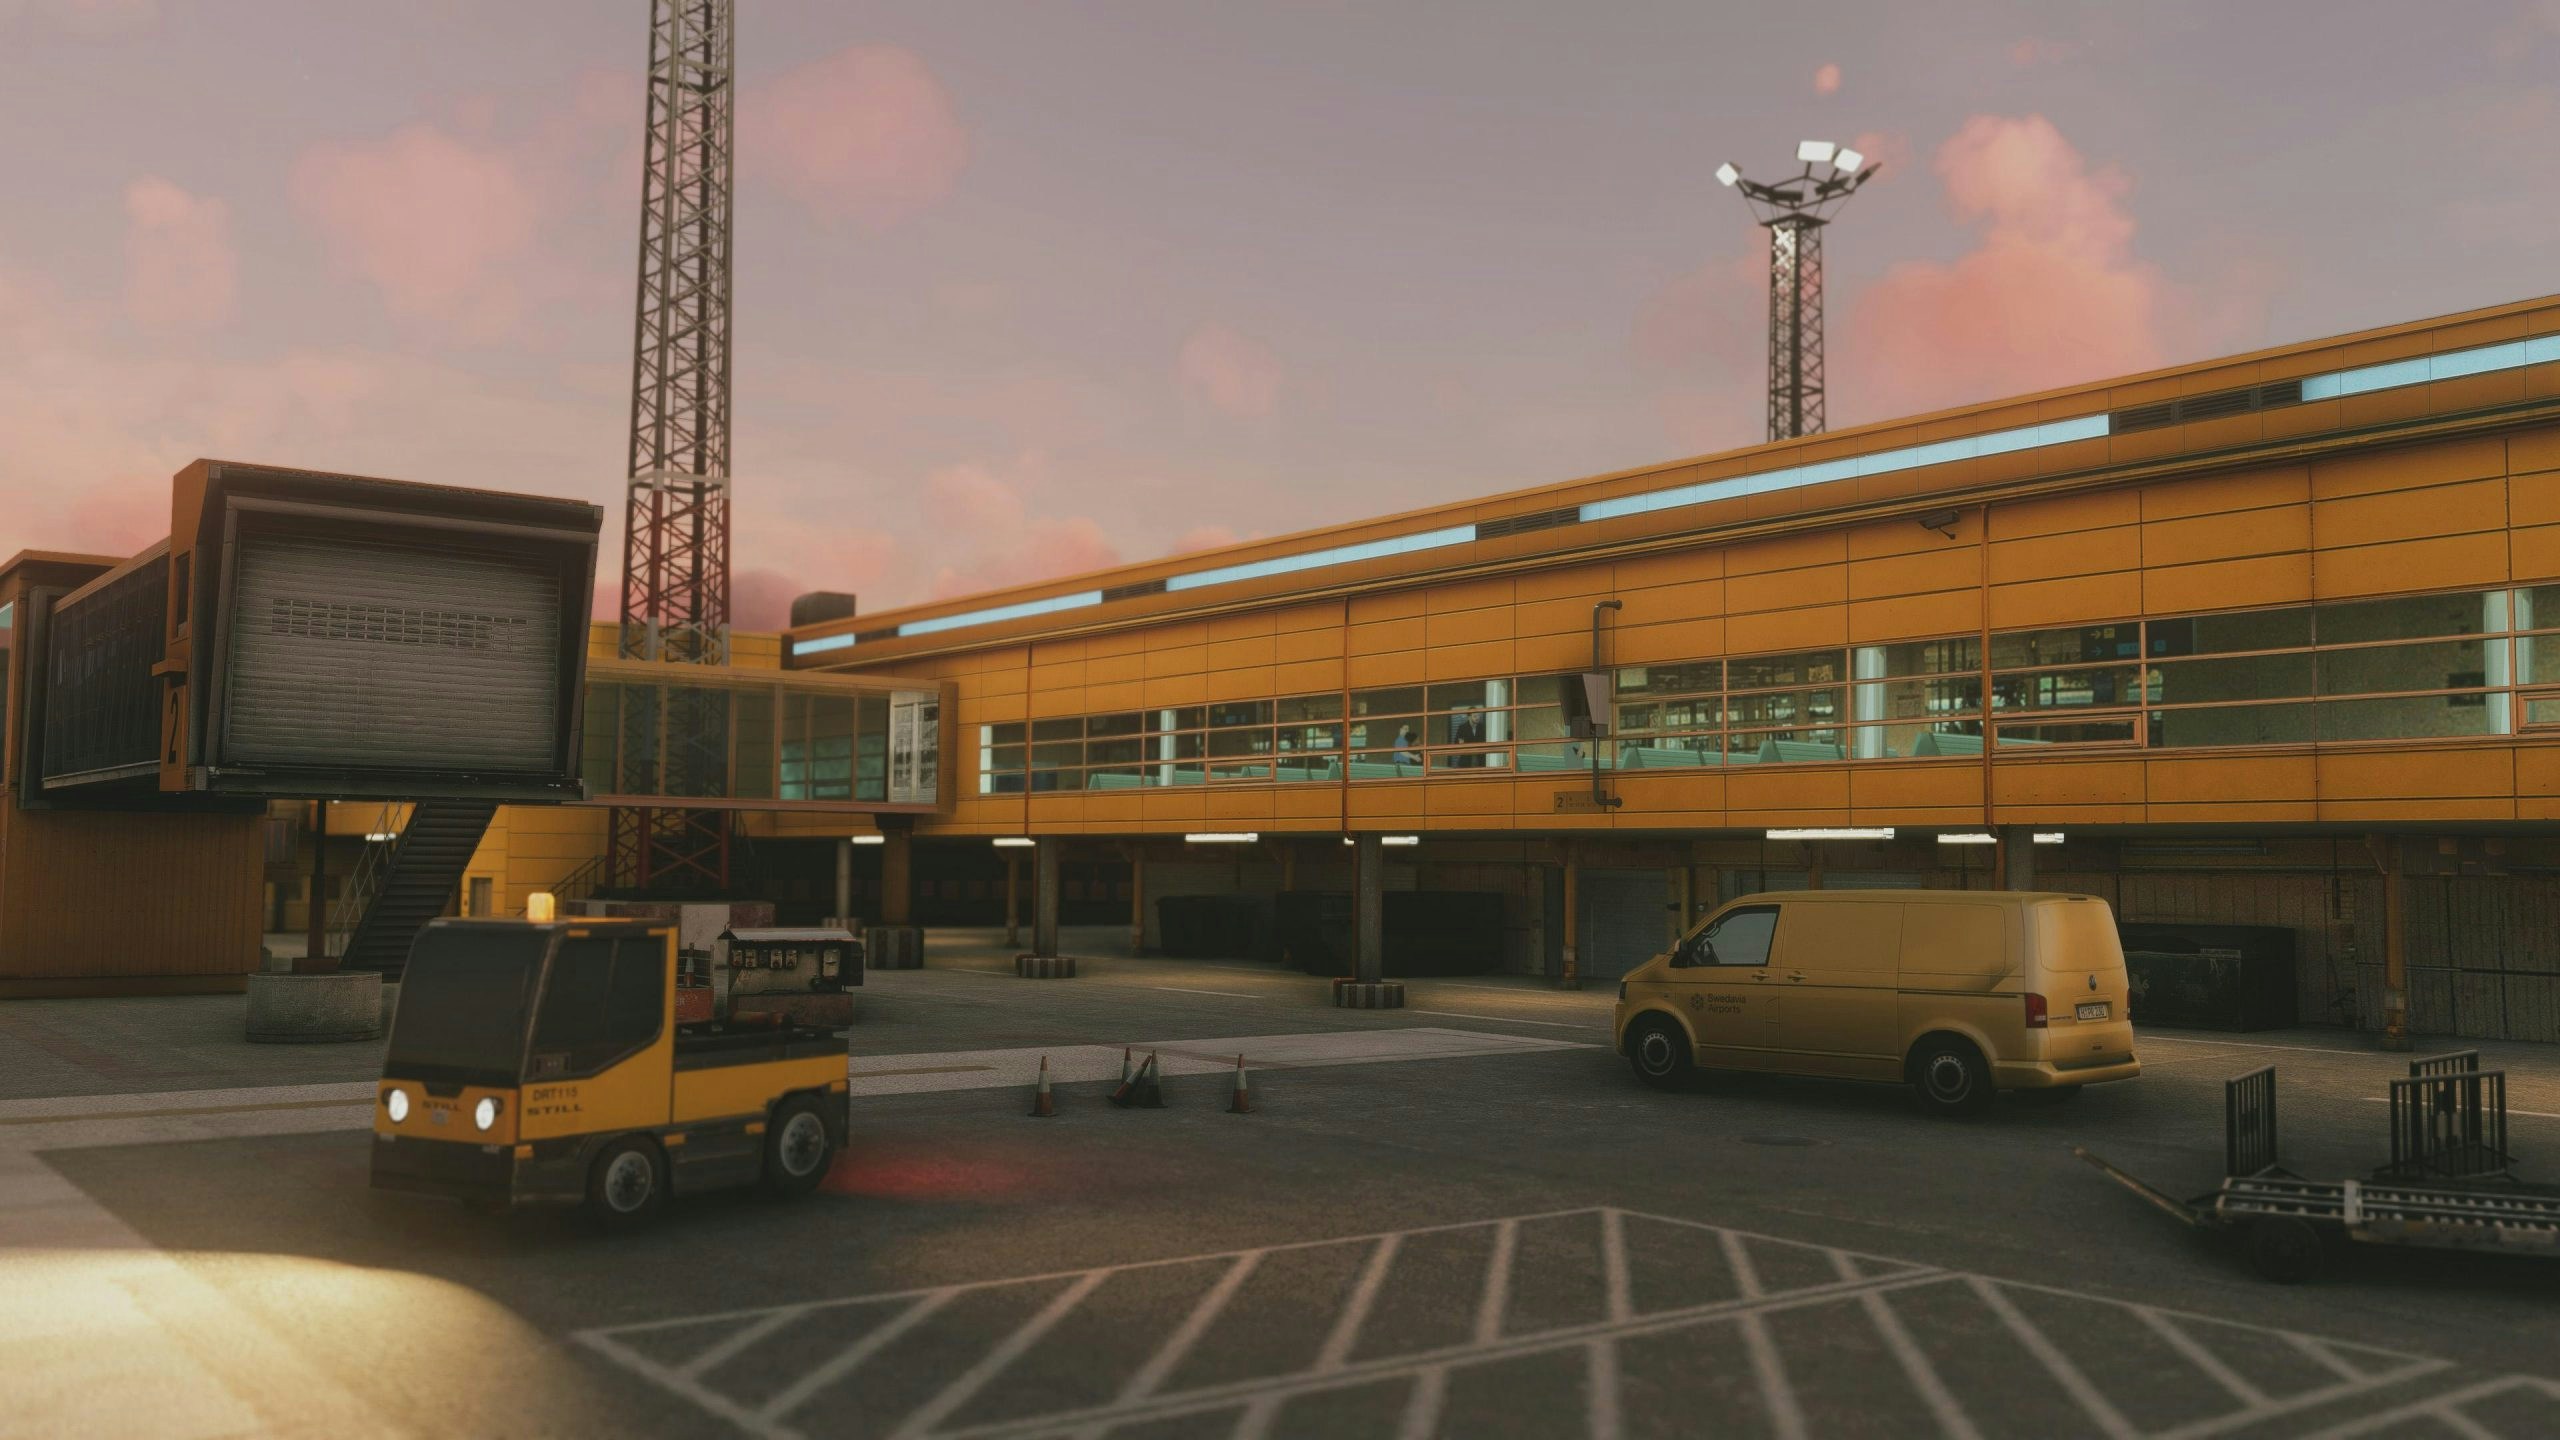 Orbx's Indie Dev Marcus Nyberg Provides Big Status Update on Various Projects